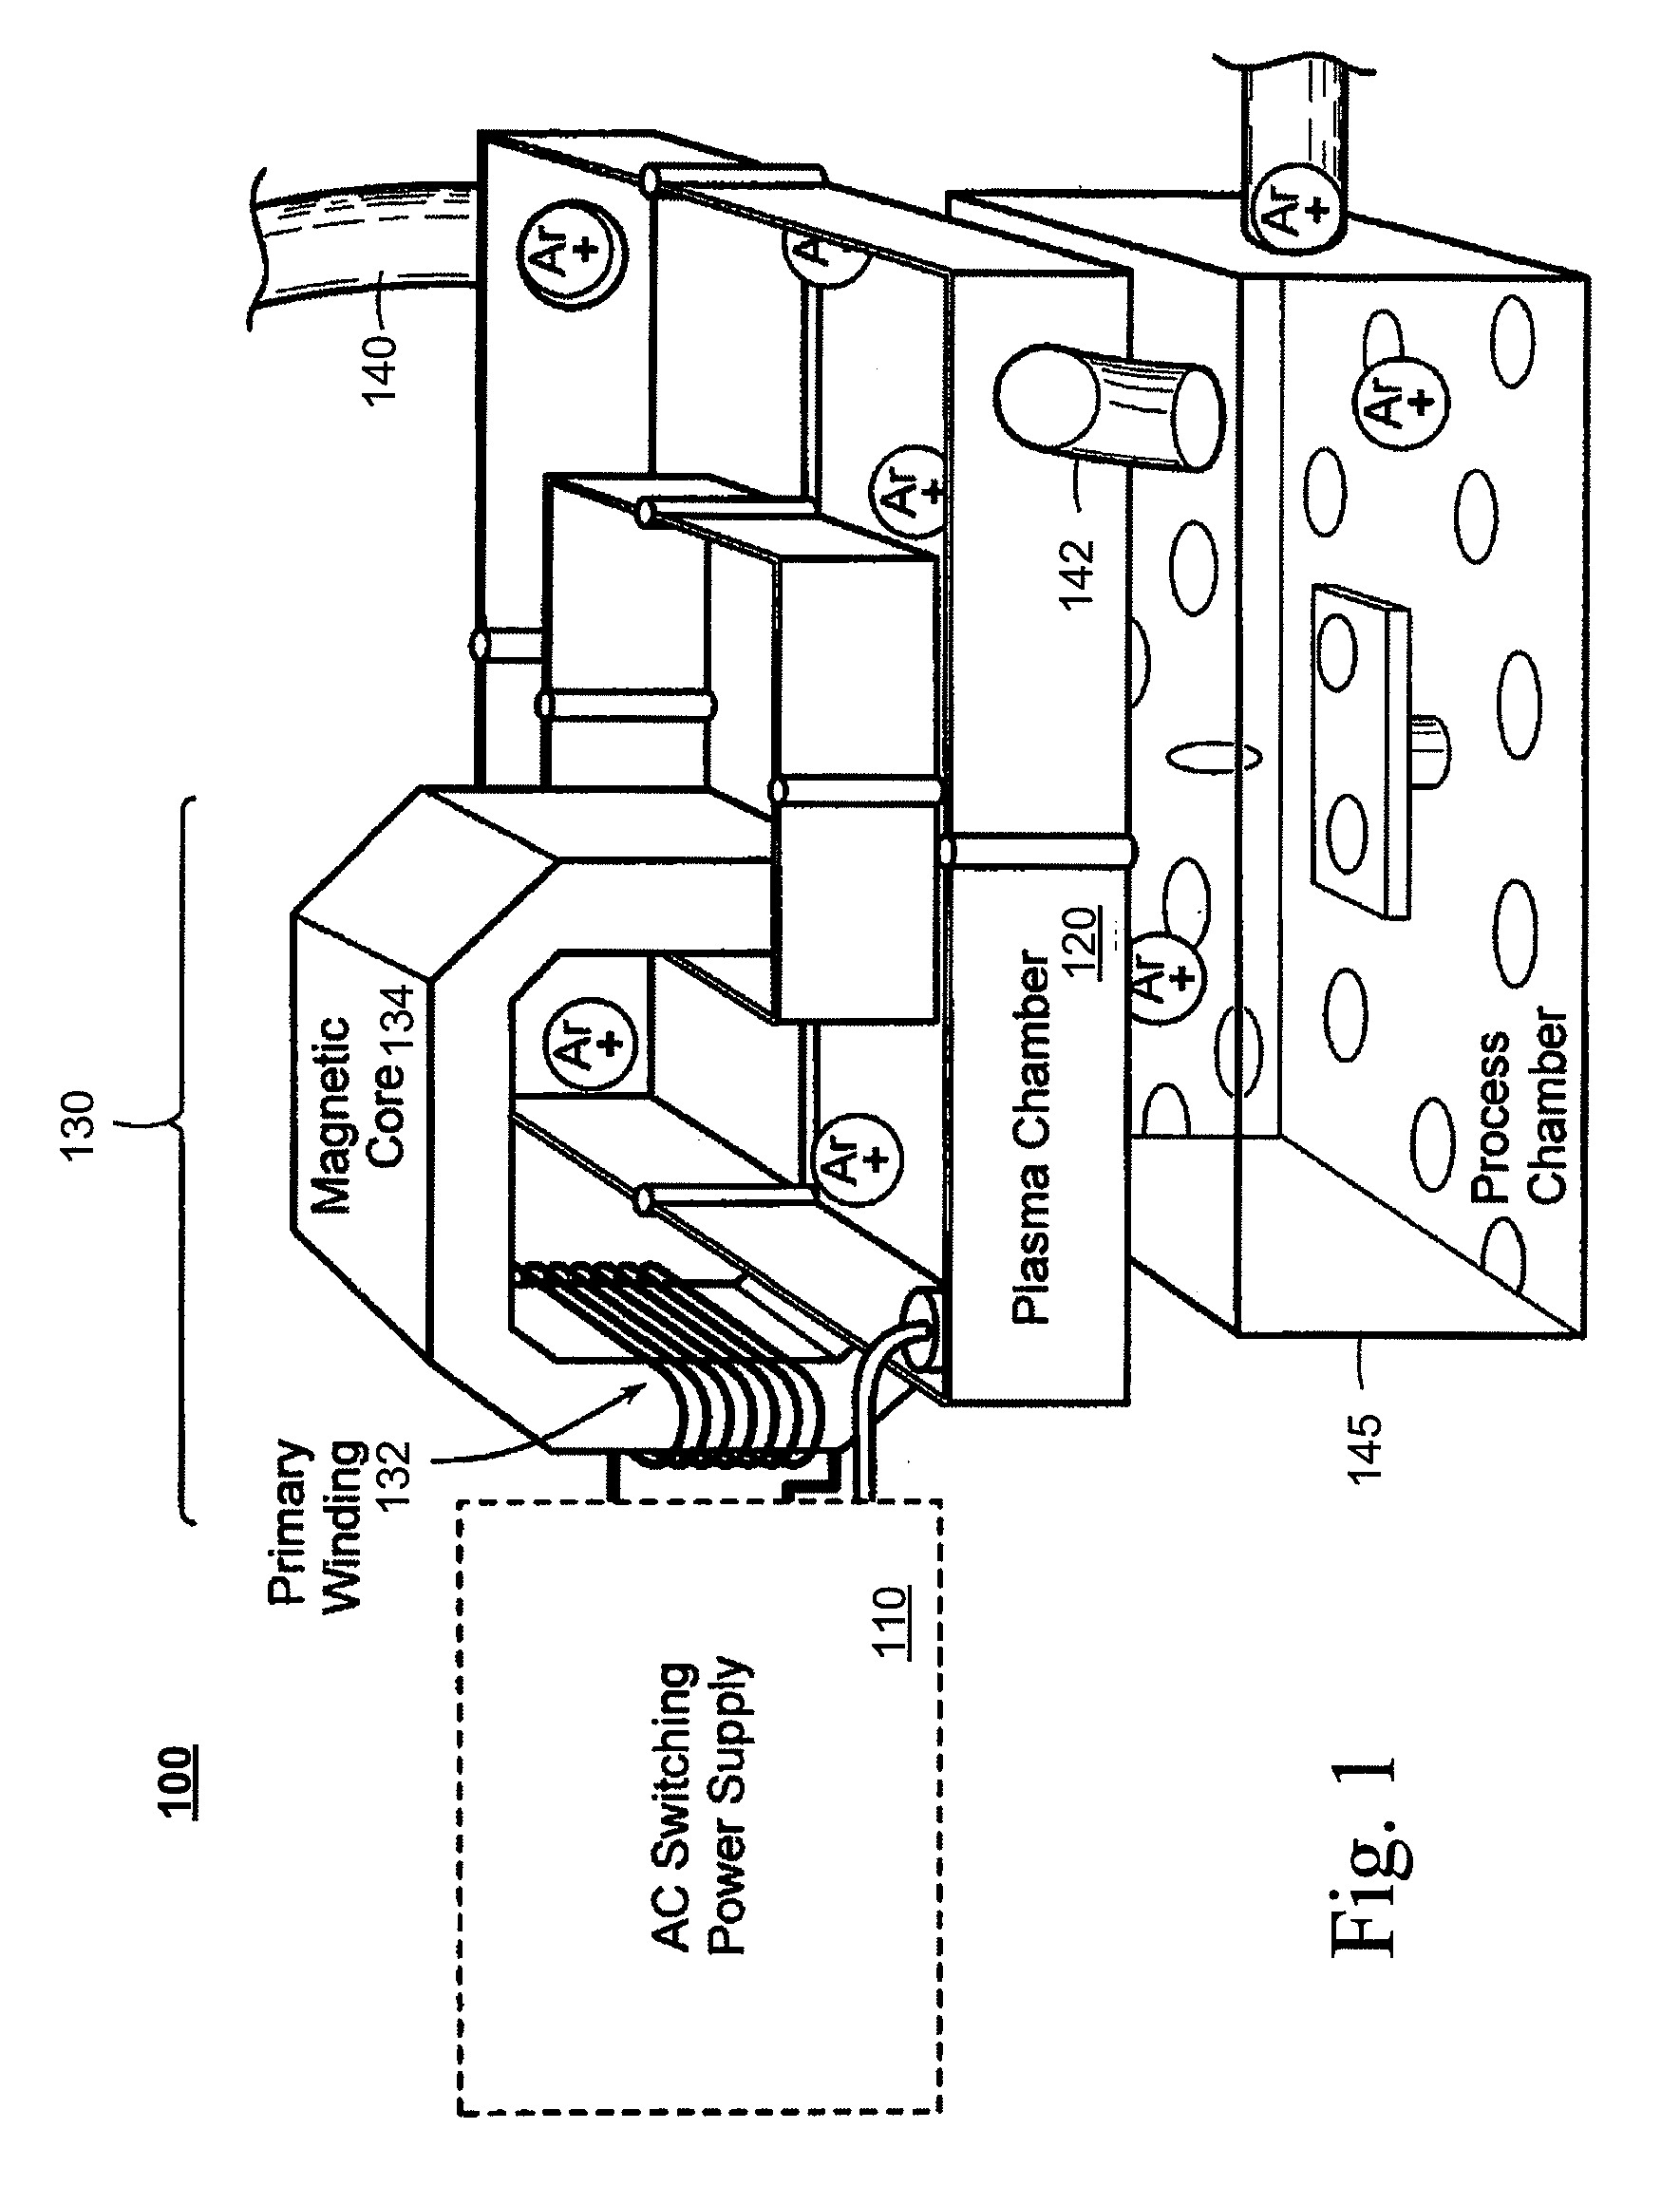 Method and Apparatus of Providing Power to Ignite and Sustain a Plasma in a Reactive Gas Generator